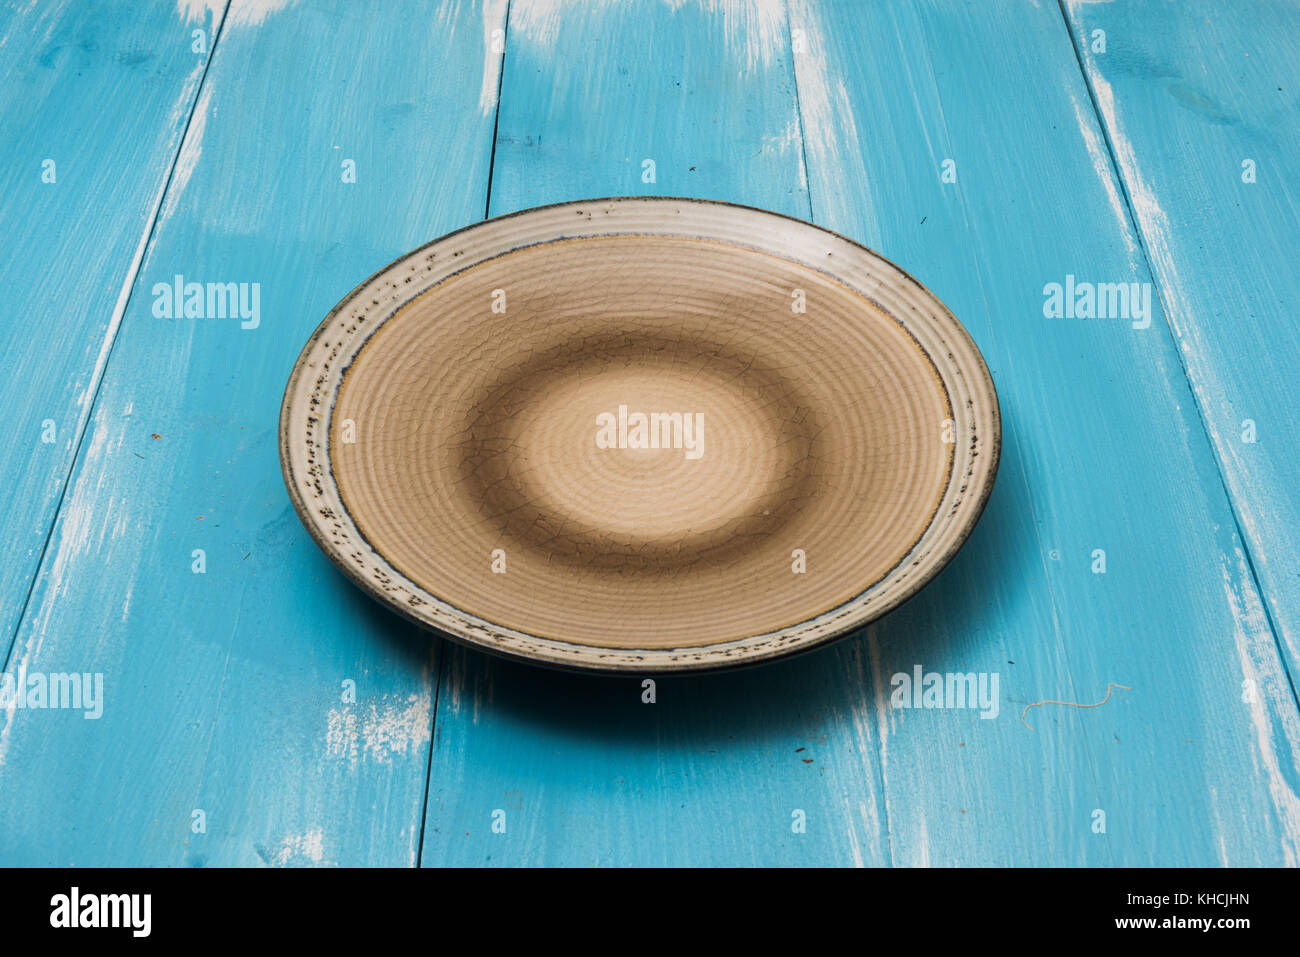 Round plate on blue wooden table with perspective side view Stock Photo